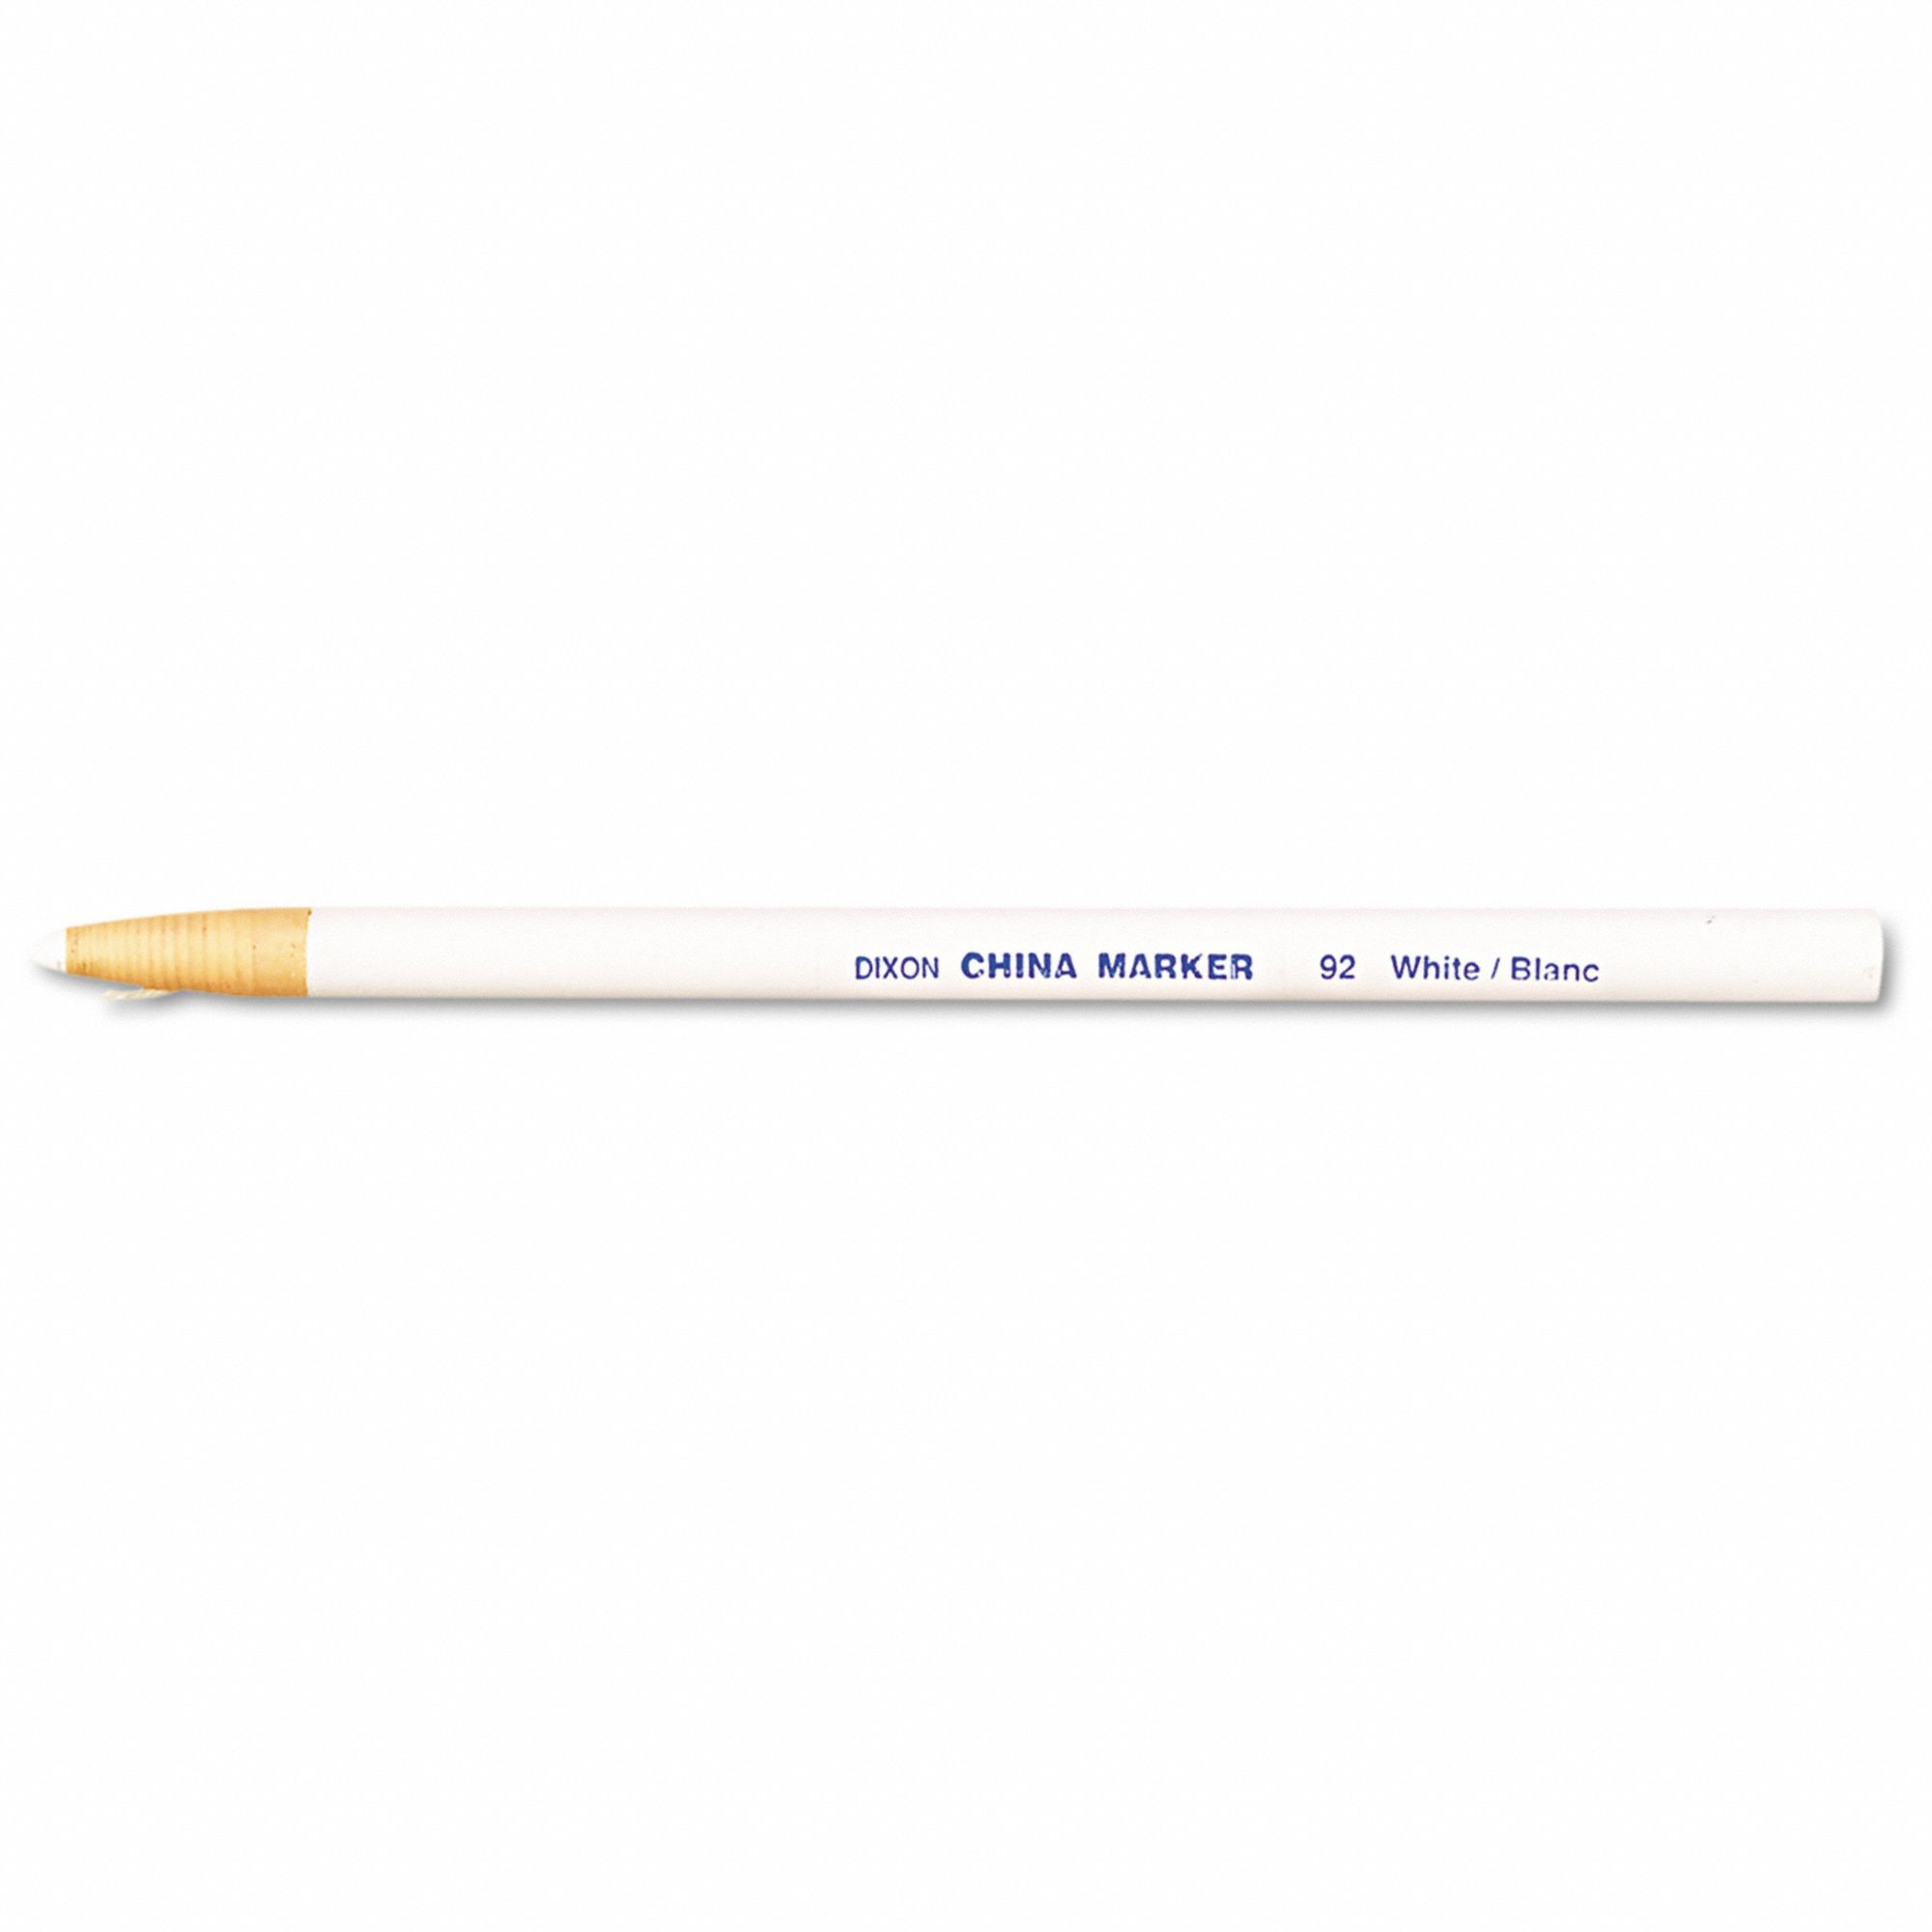 China Marker: Grease Pencil, 1/4 in Tip Wd, Bullet, White, Wax, Not Refillable, White, 12 PK